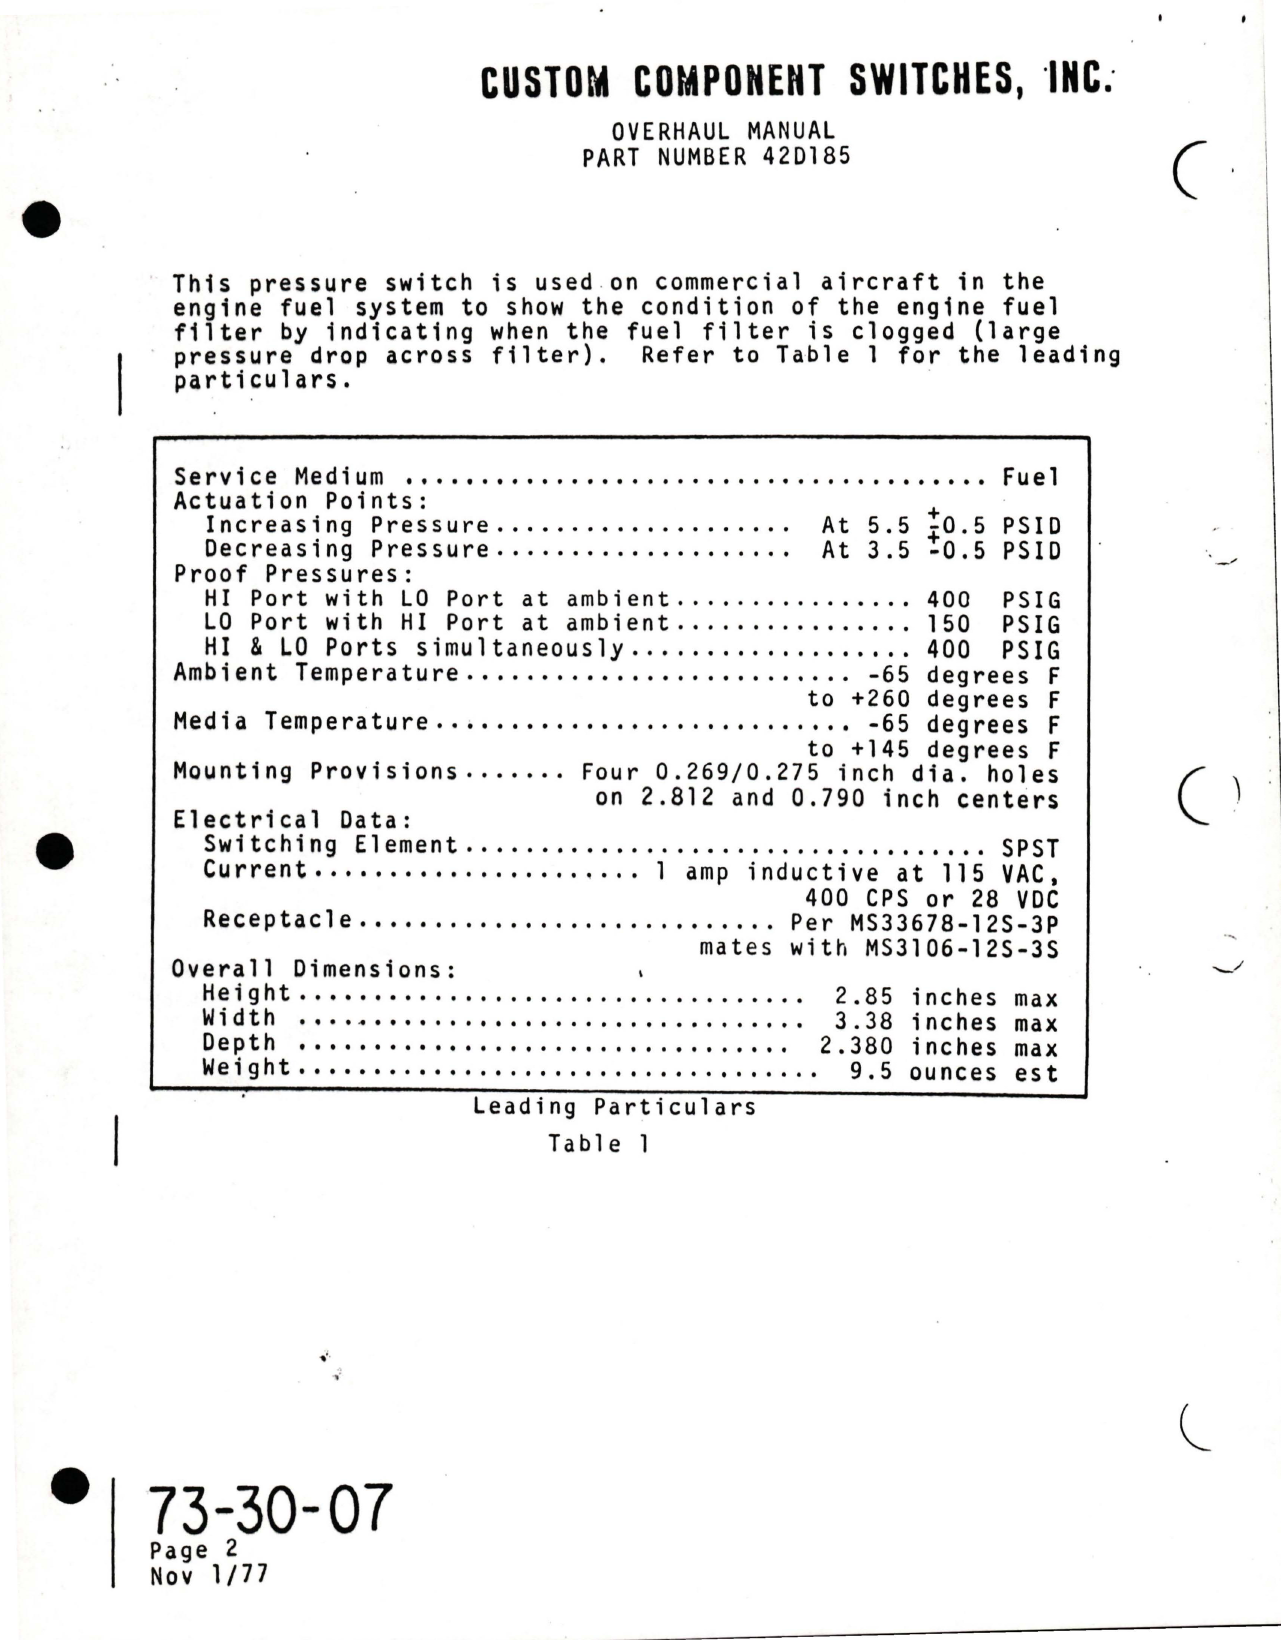 Sample page 7 from AirCorps Library document: Overhaul for Pressure Switch - Part 42D185 